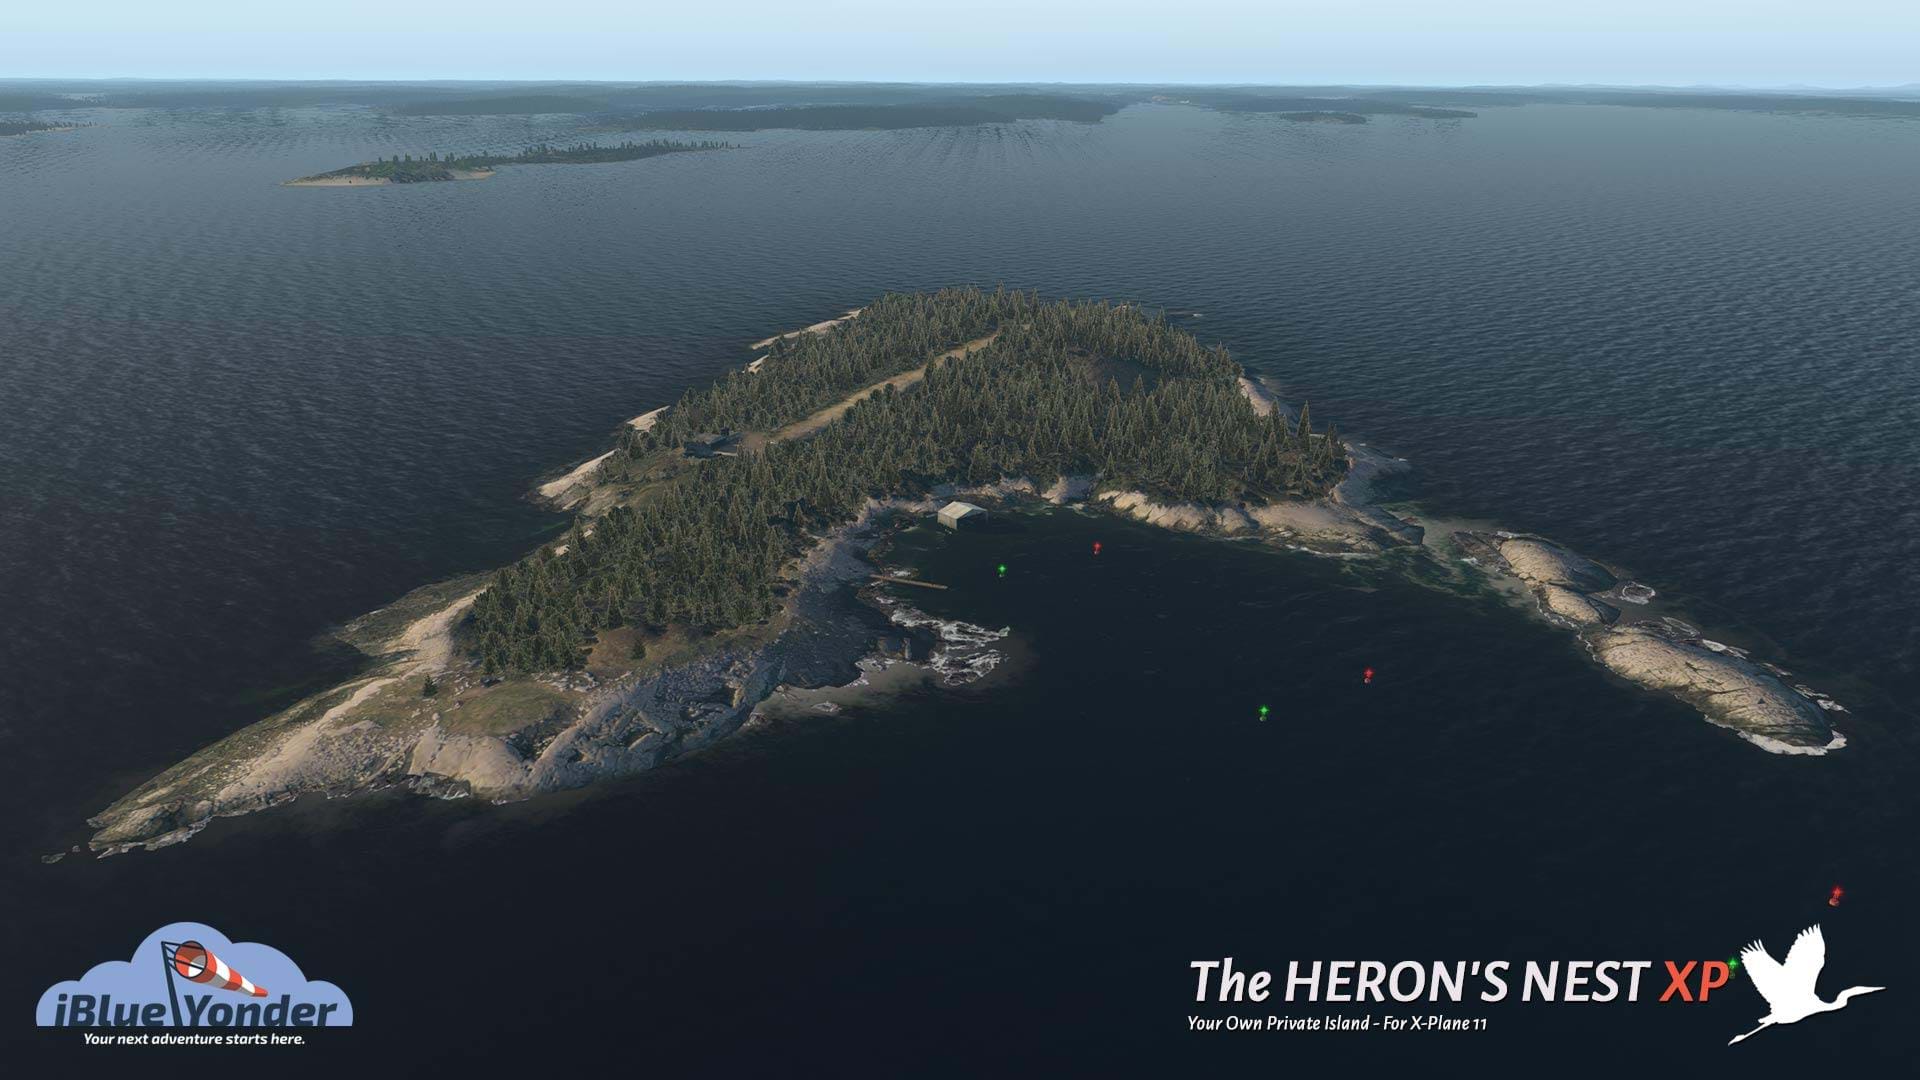 iBlueYonder released Heron's Nest for X-Plane - free of charge